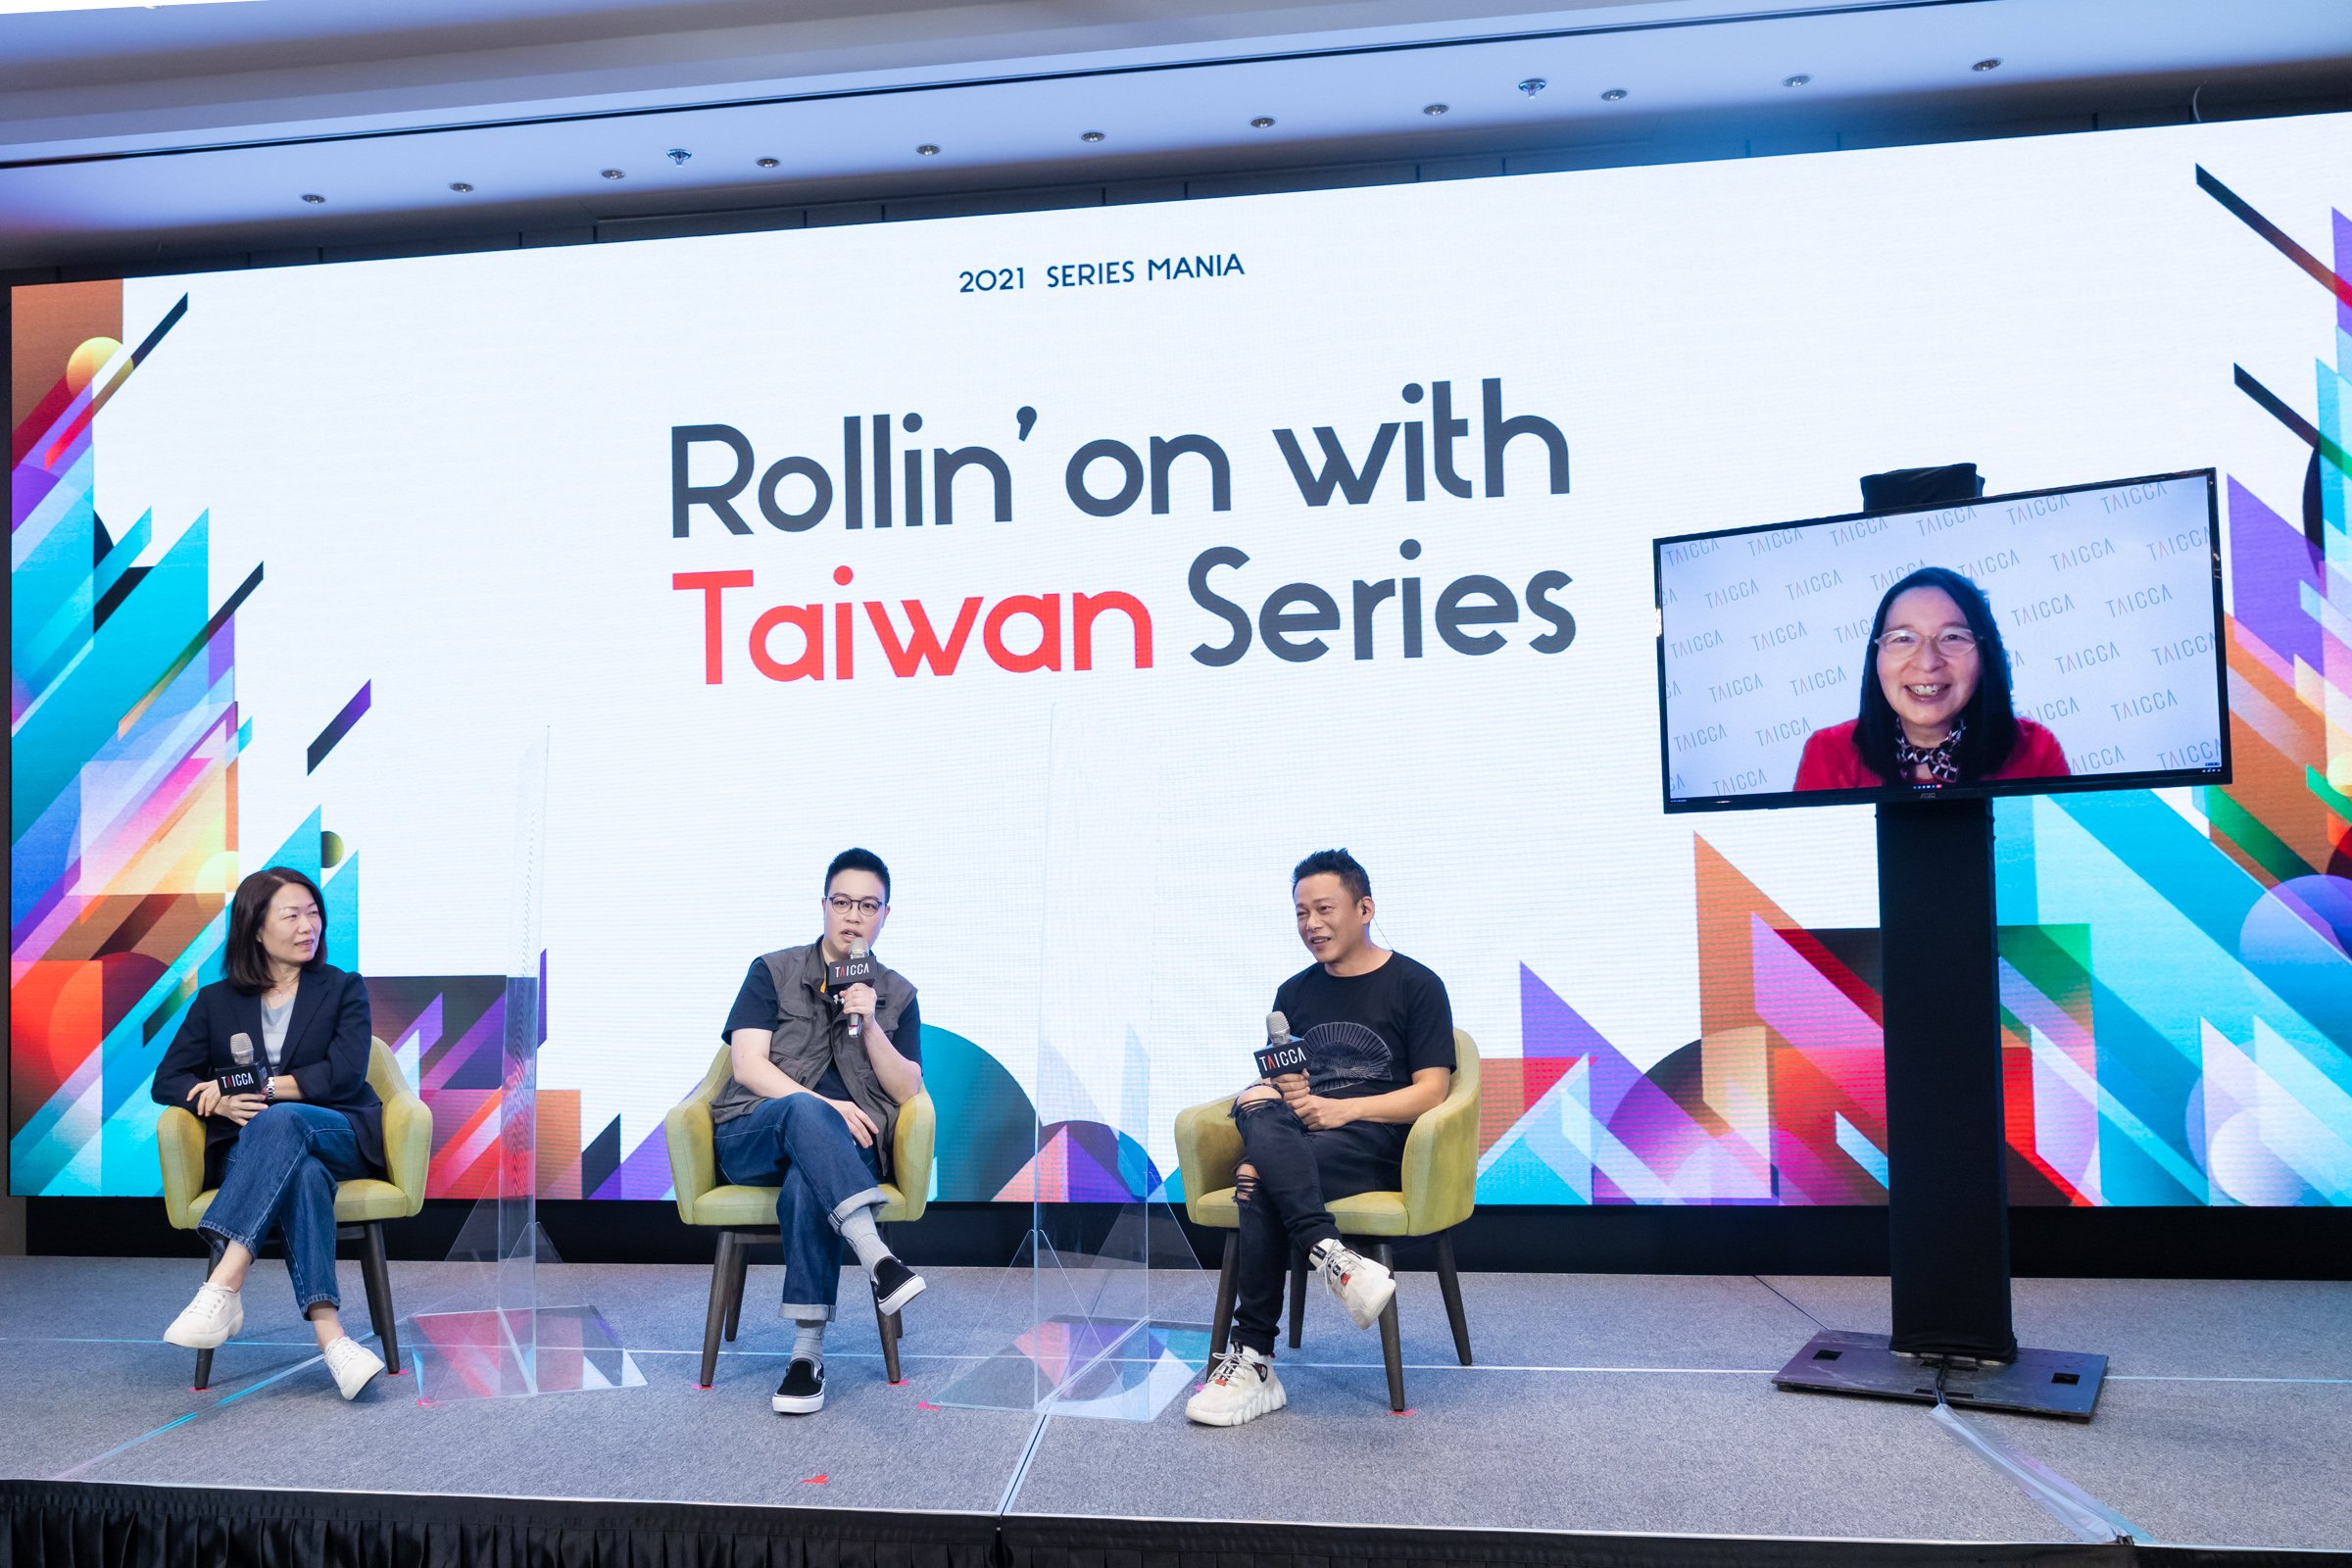 TAICCA Co-Hosts Taiwan Series Showcase and Co-Production Incentives with Series Mania, Unveiling the First TV Series Produced by Director Hou Hsiao-Hsien